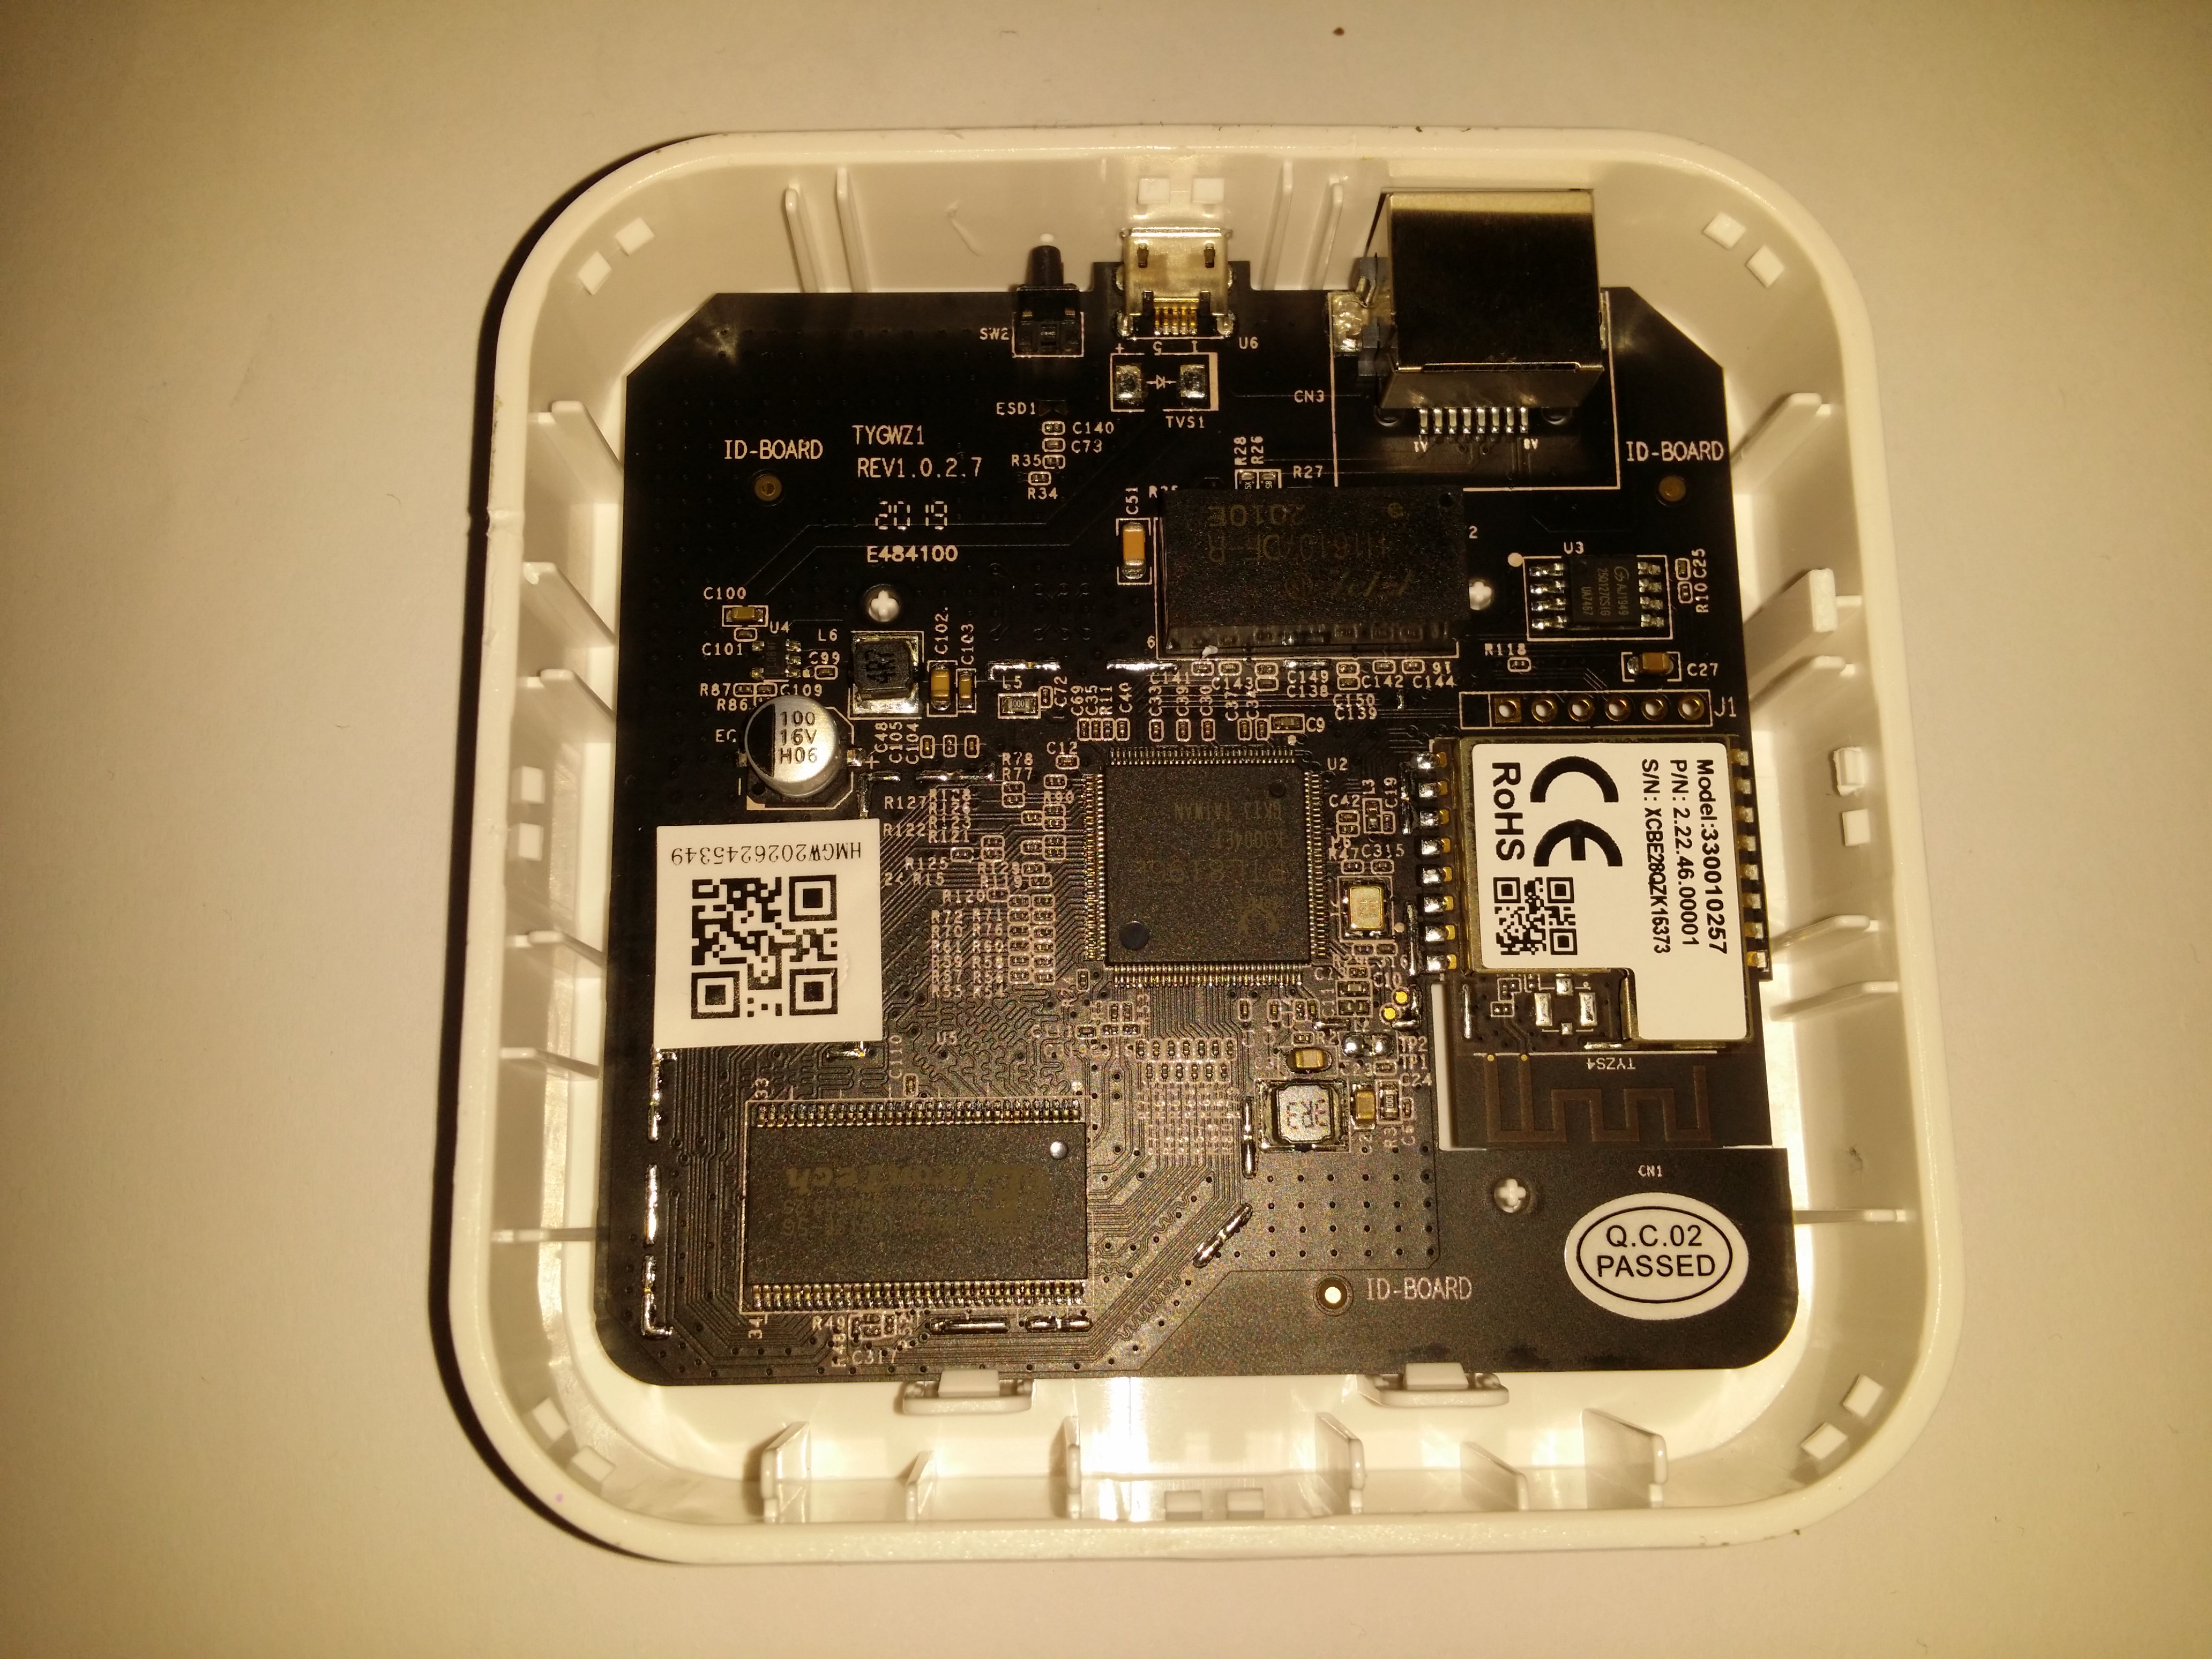 Zigbee products users Lux) Lidl Livarno for branded (Silvercrest Source and Open